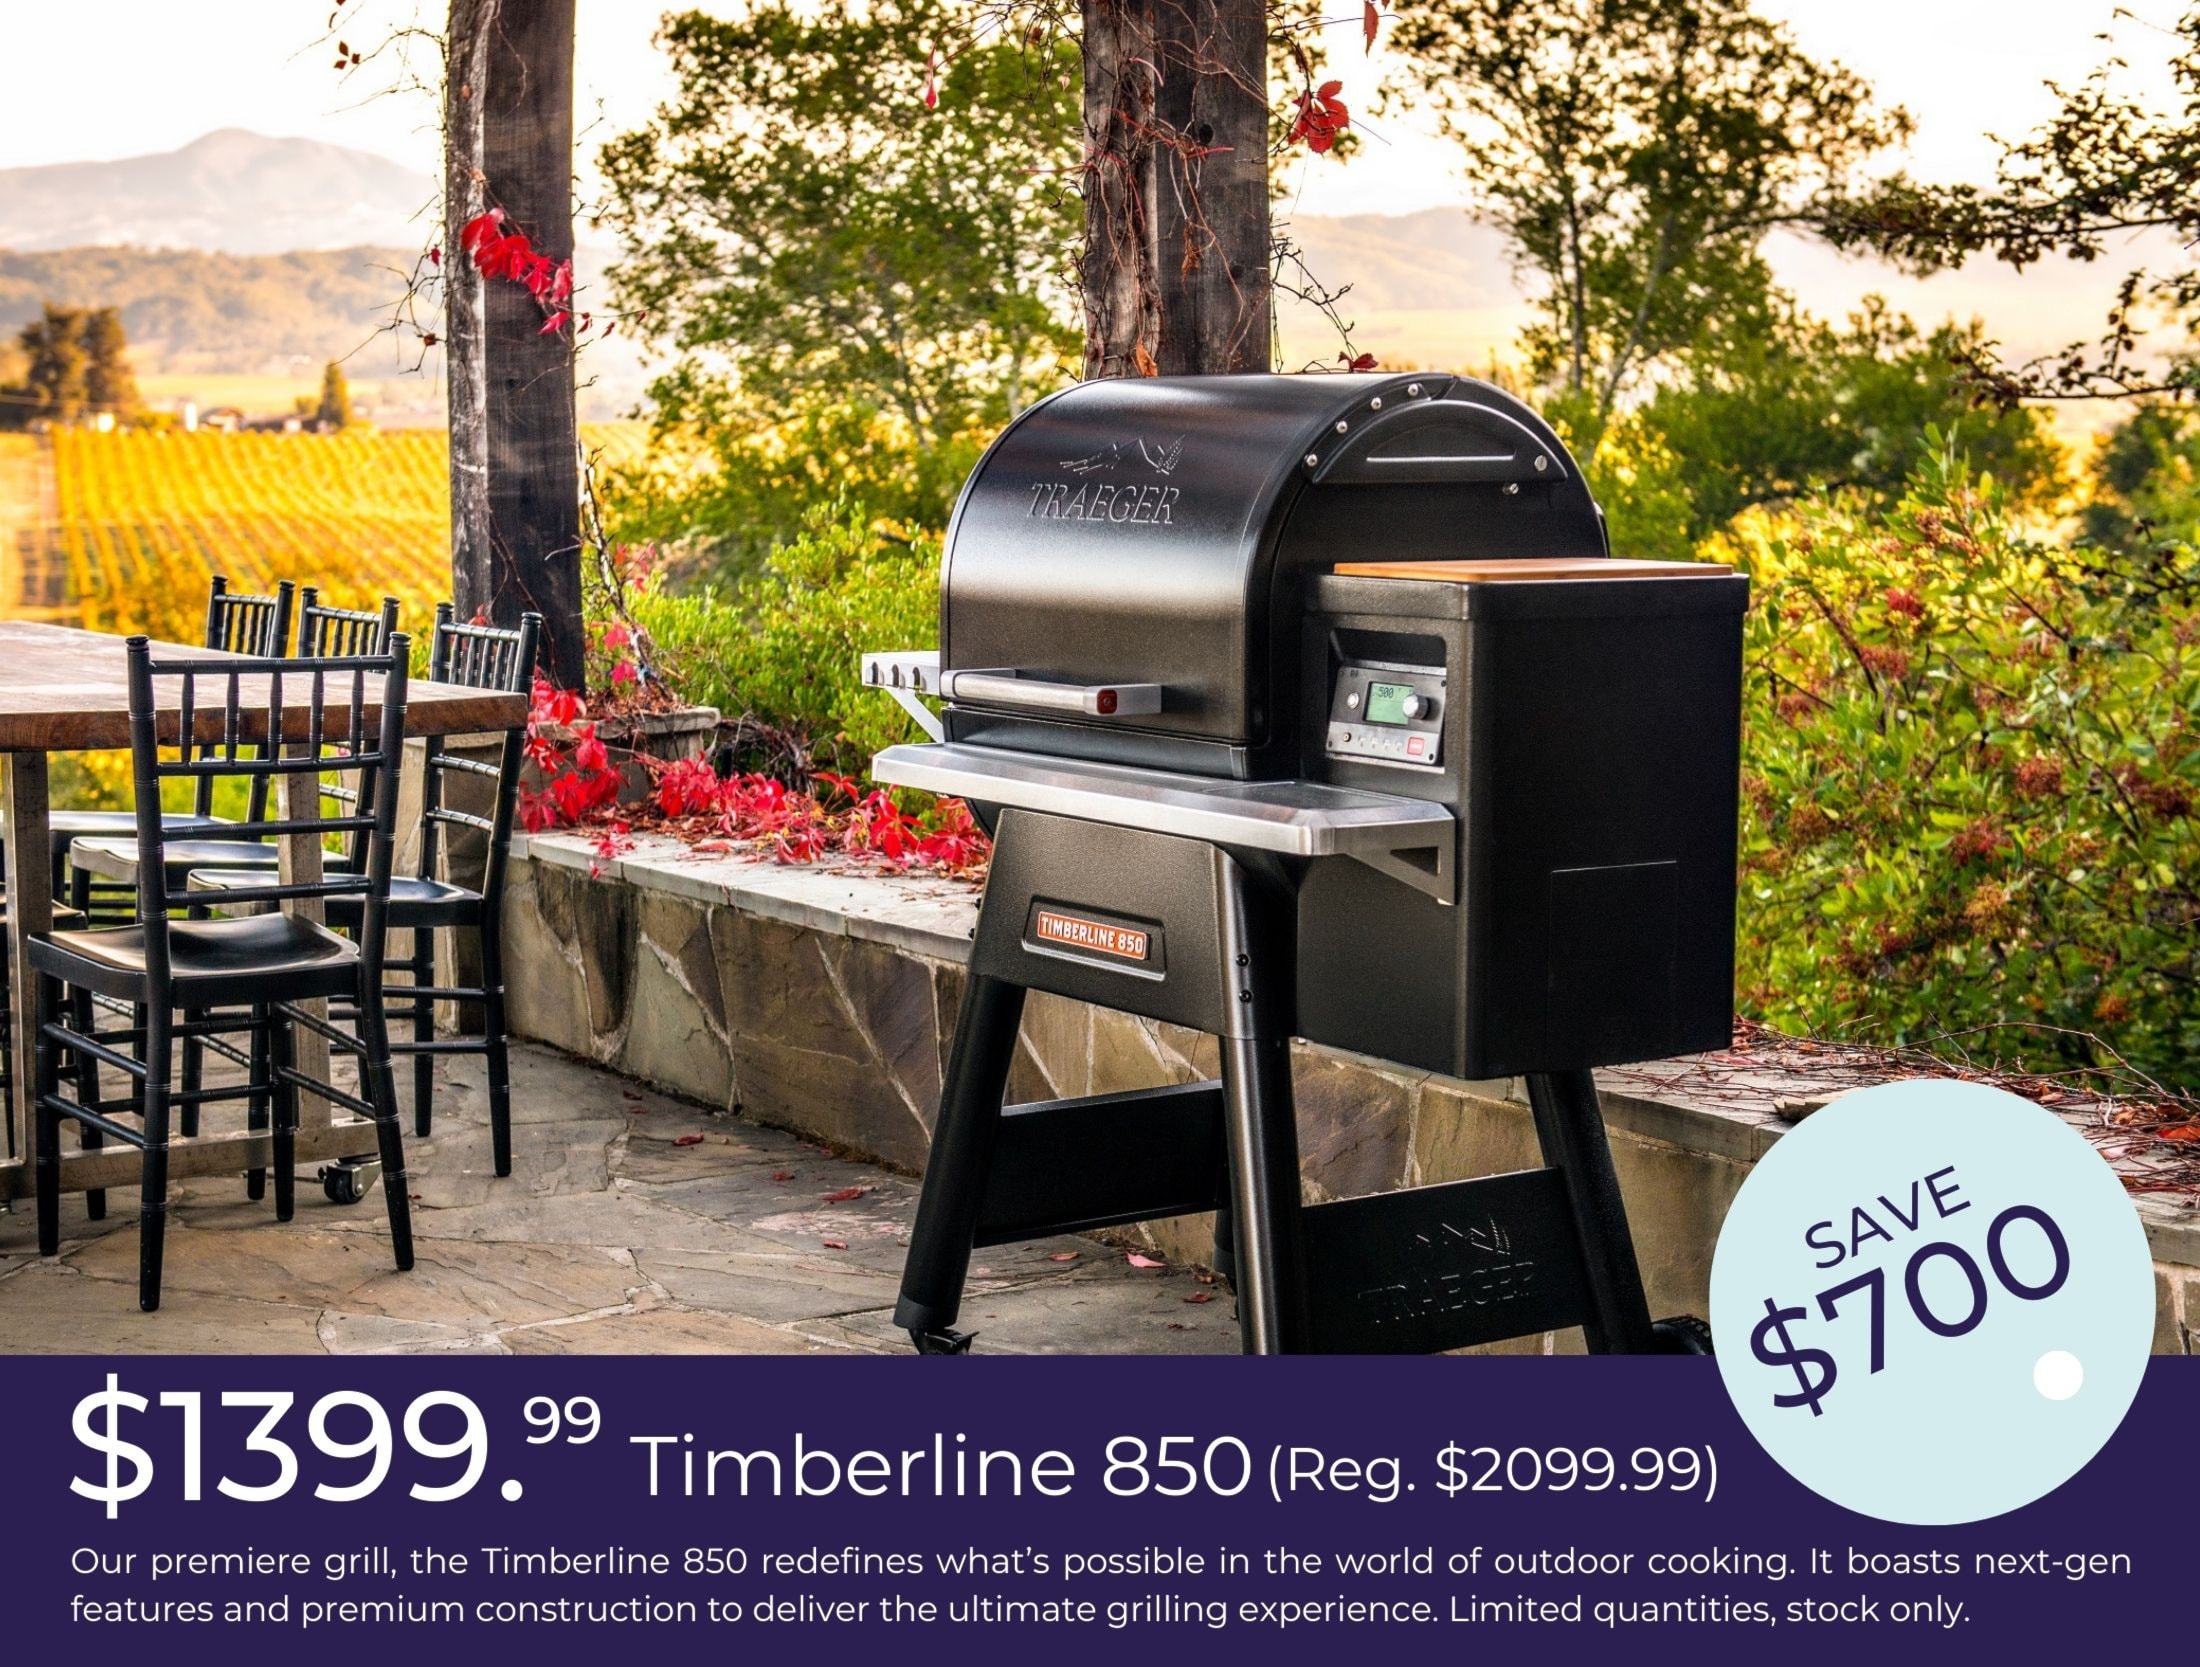 Timberline 850 Traeger Grill